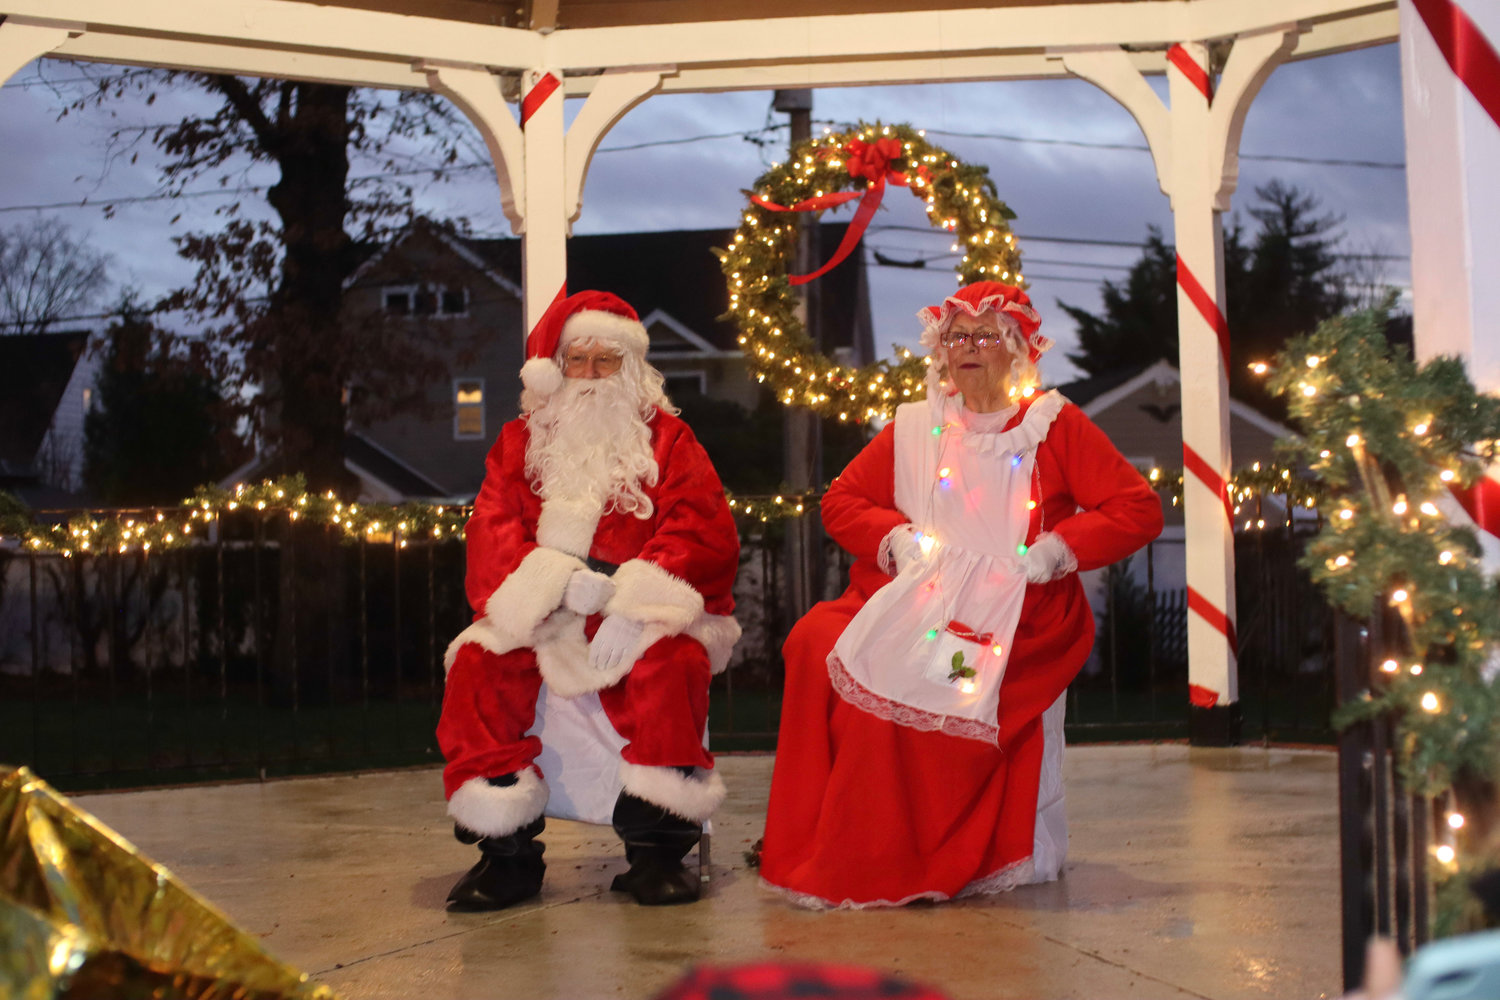 Santa and Mrs. Claus were the guests of honor at the Winter Festival. It was their first time back at the Rath Park Gazebo in two years.